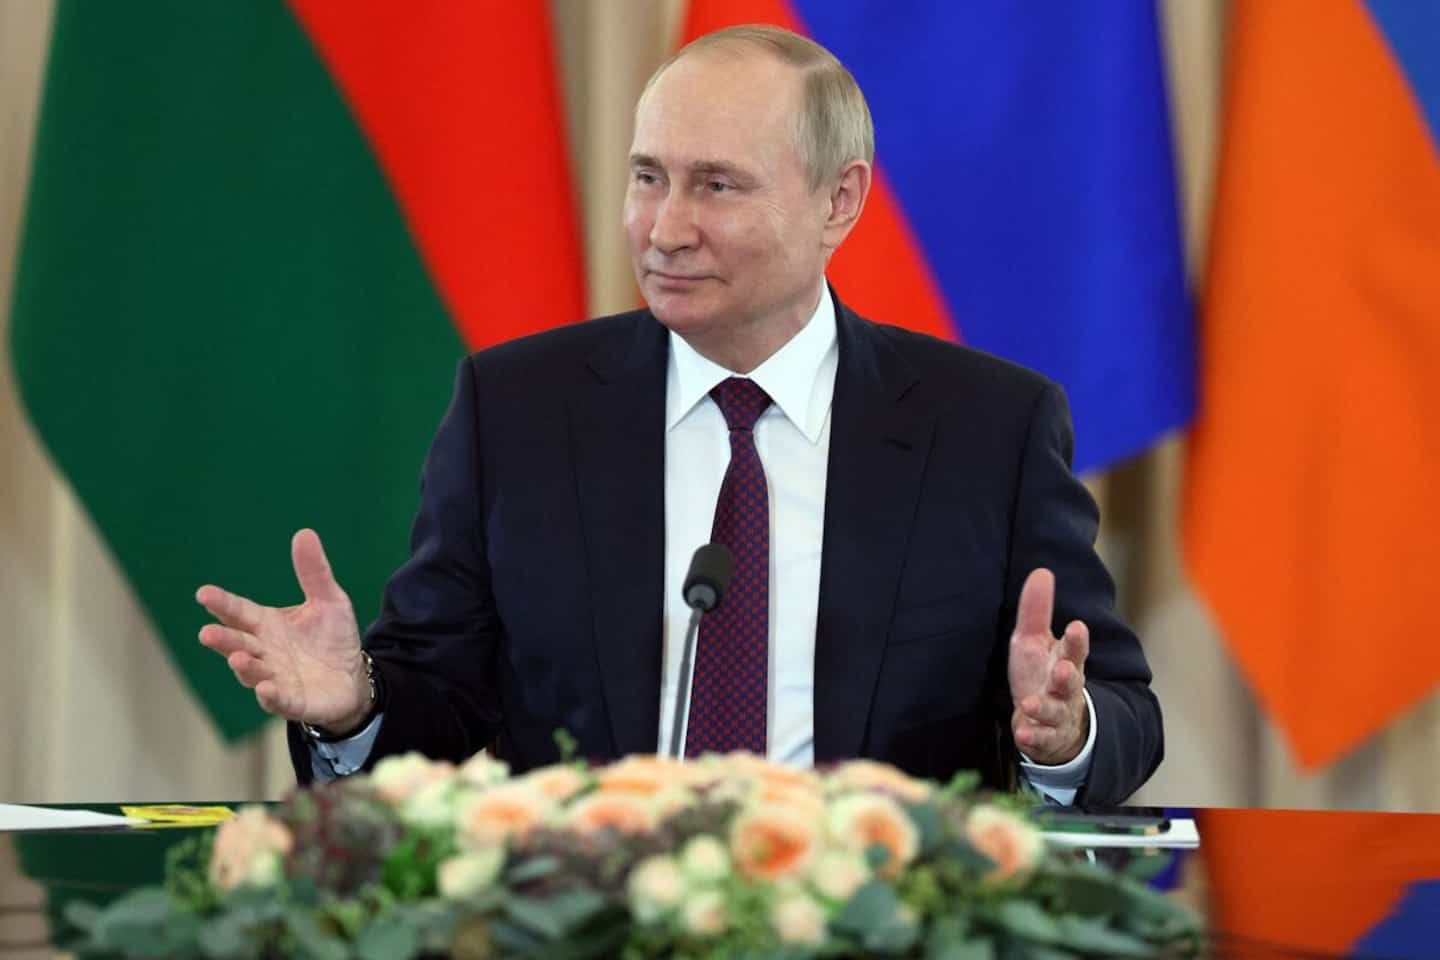 Cereals: Putin calls on Ukraine to guarantee the safety of ships